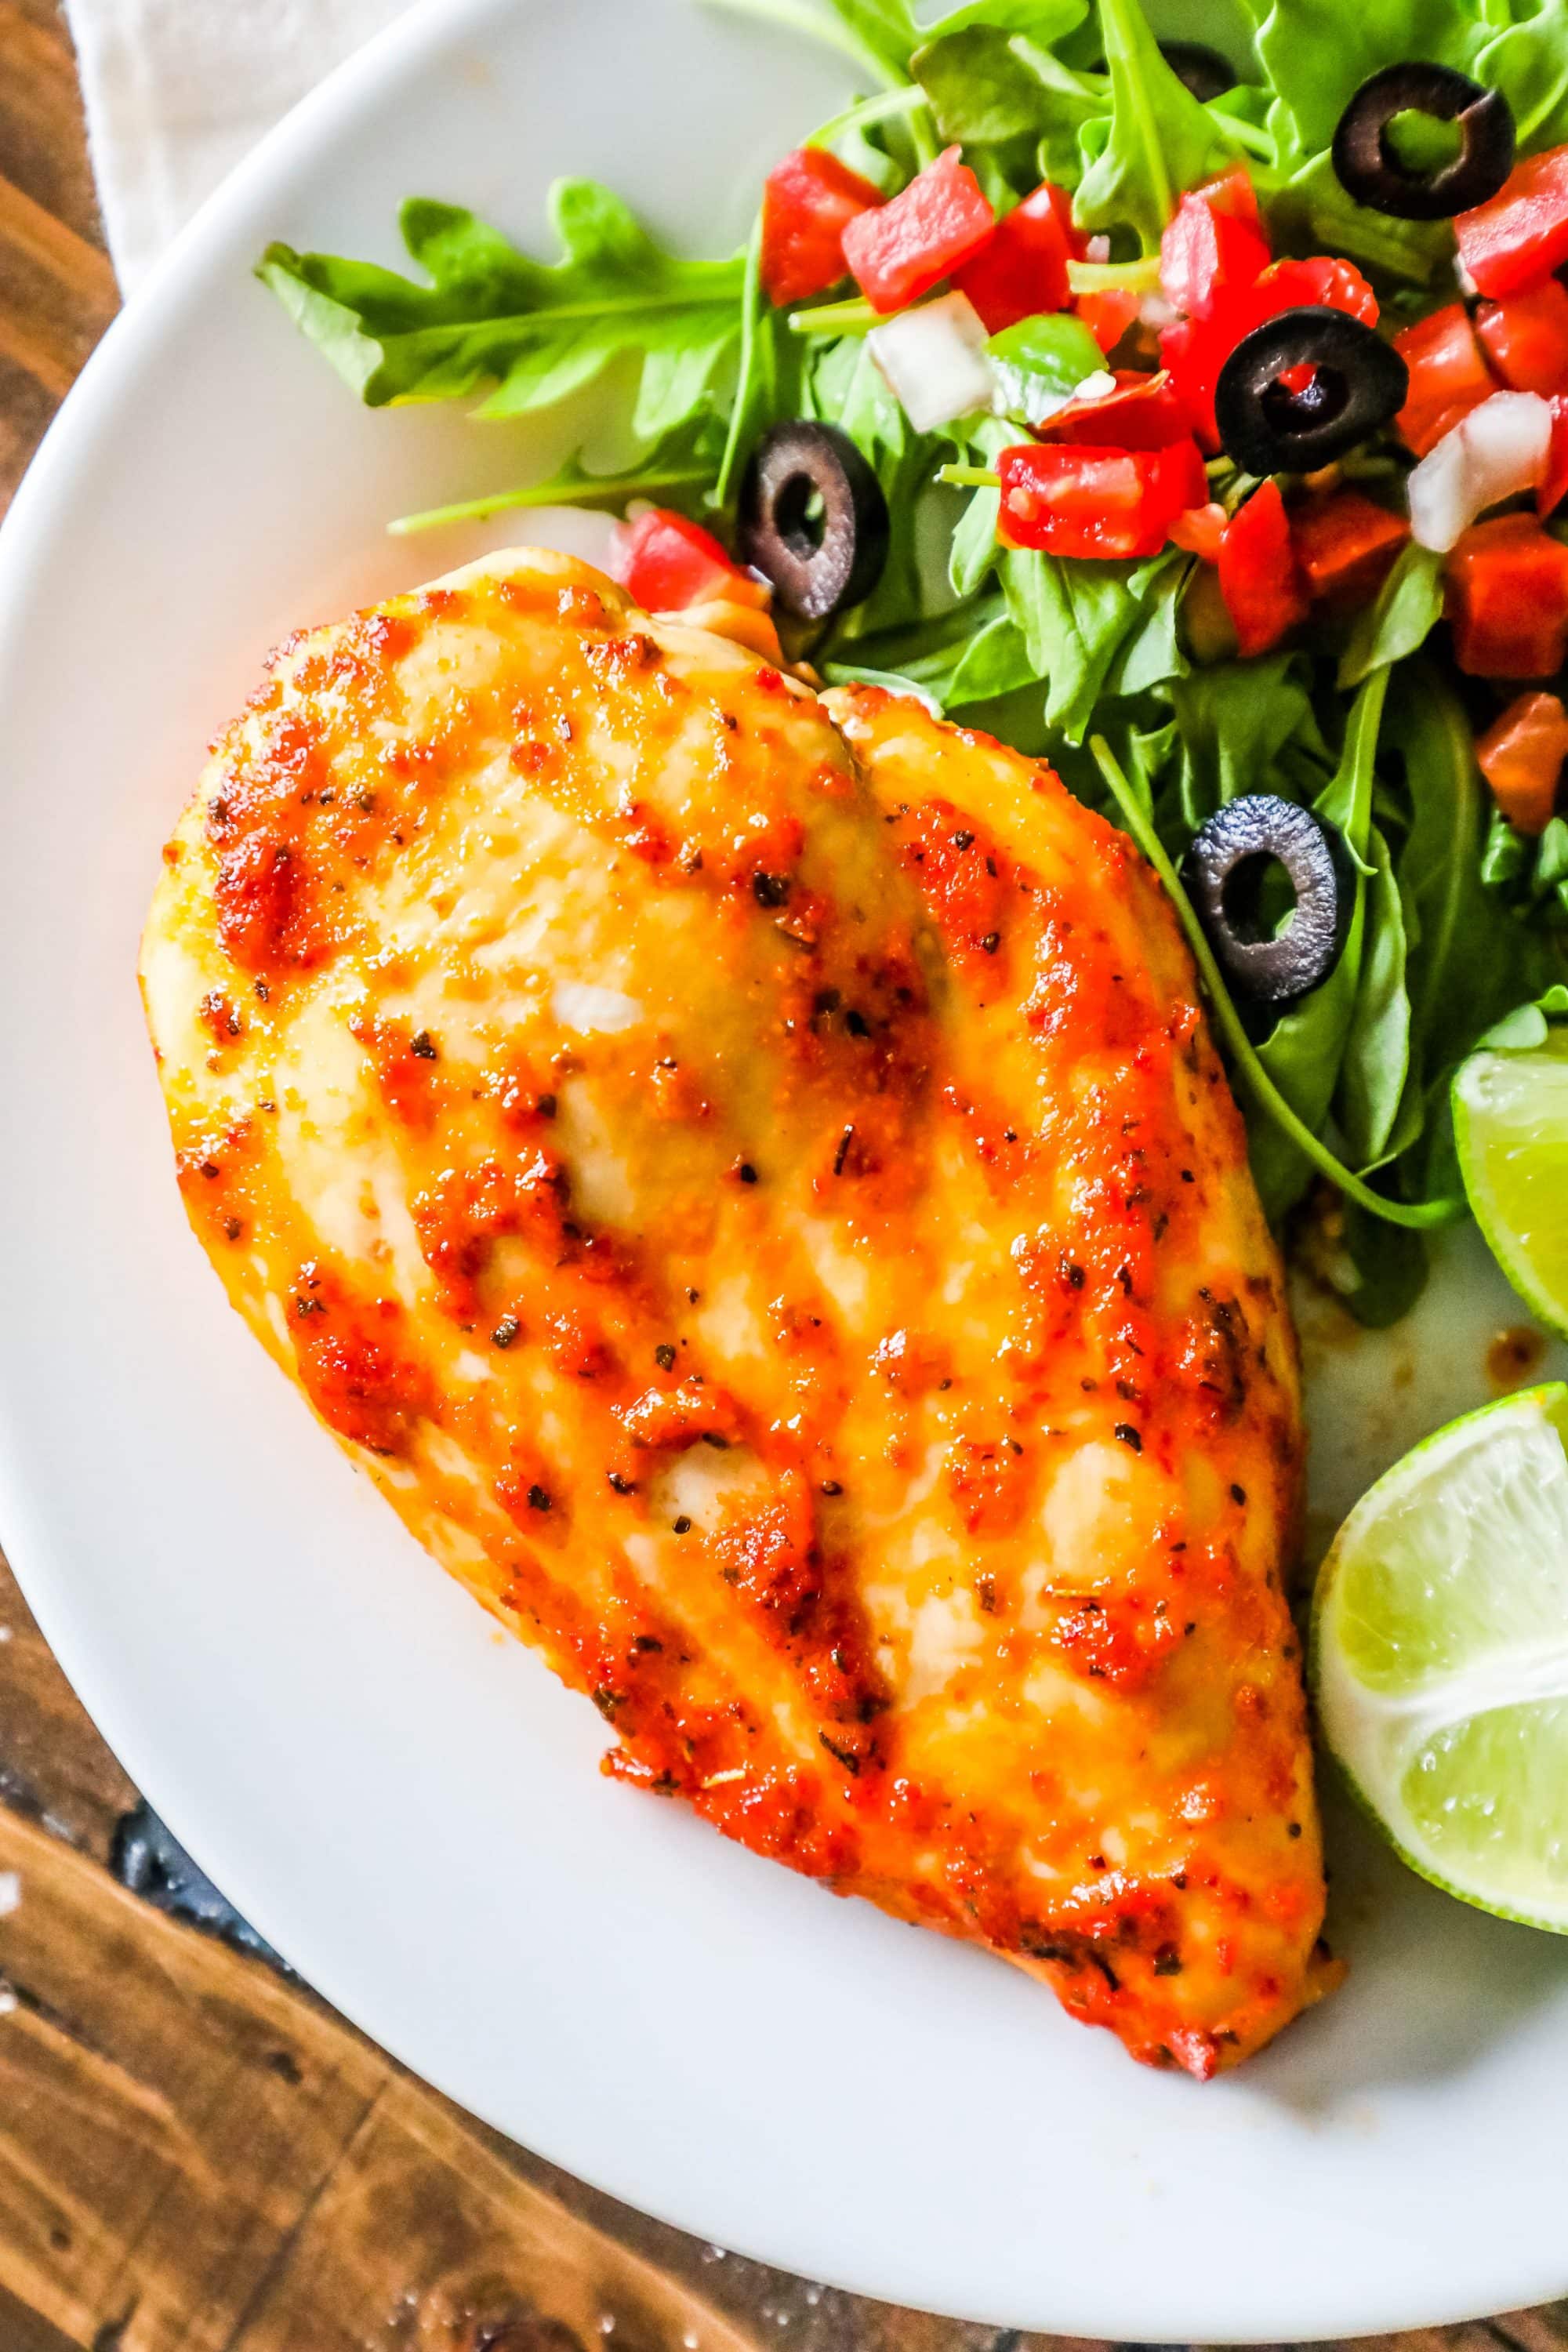 Oven roasted chicken breast served on a plate with a side salad.